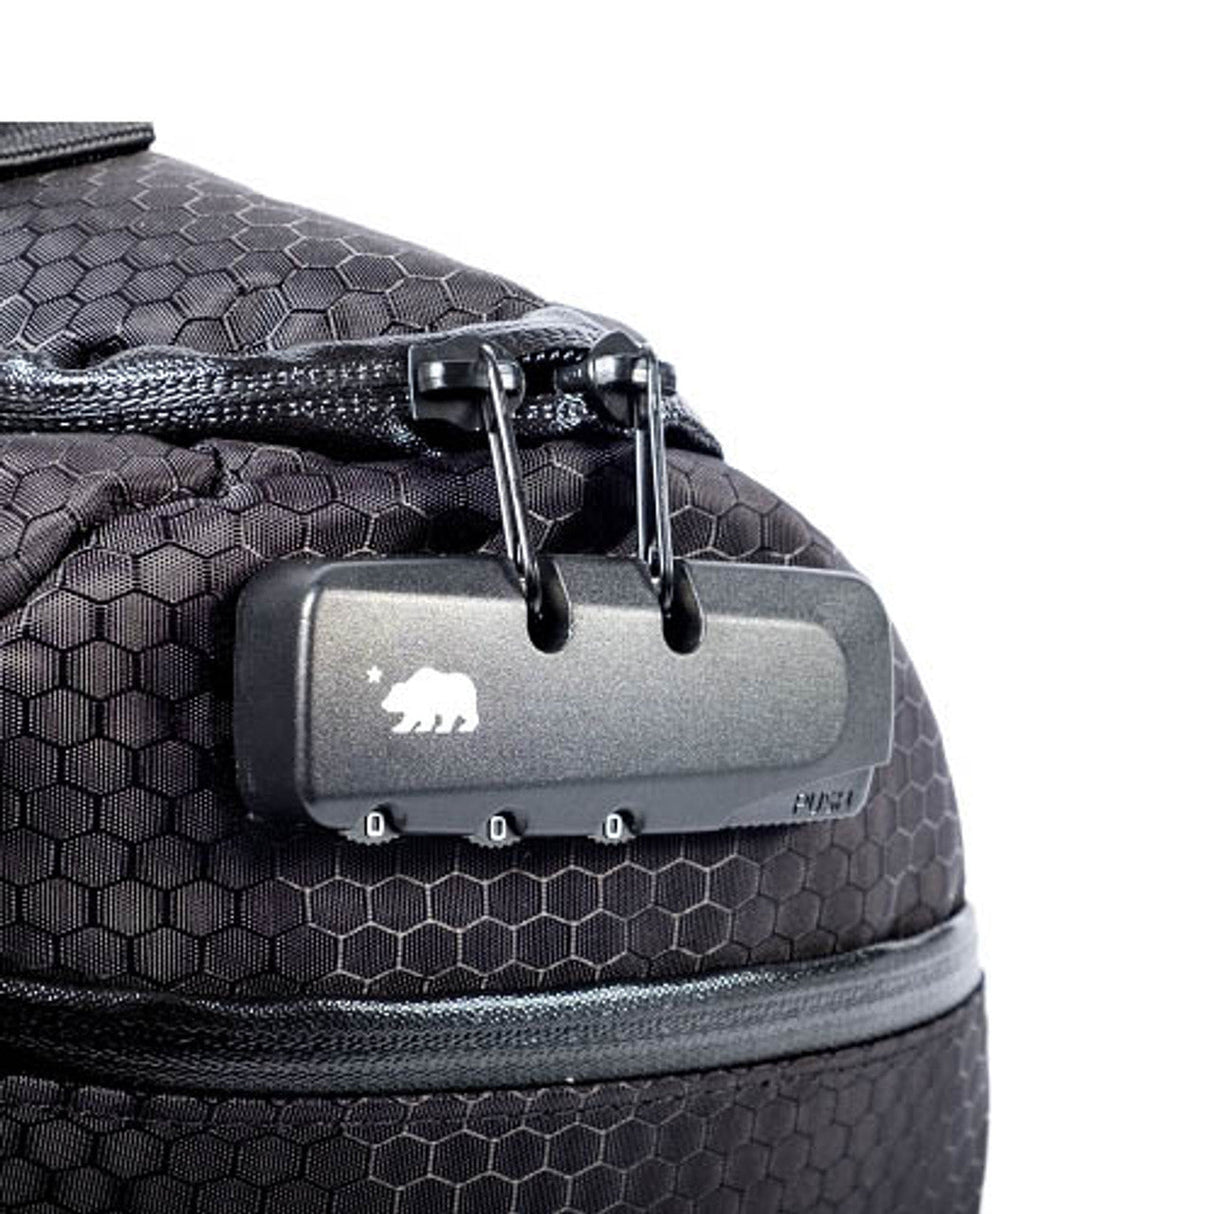 Close-up of Cali Duffle 12" Standard's zipper and logo, showcasing the durable black silicone exterior.